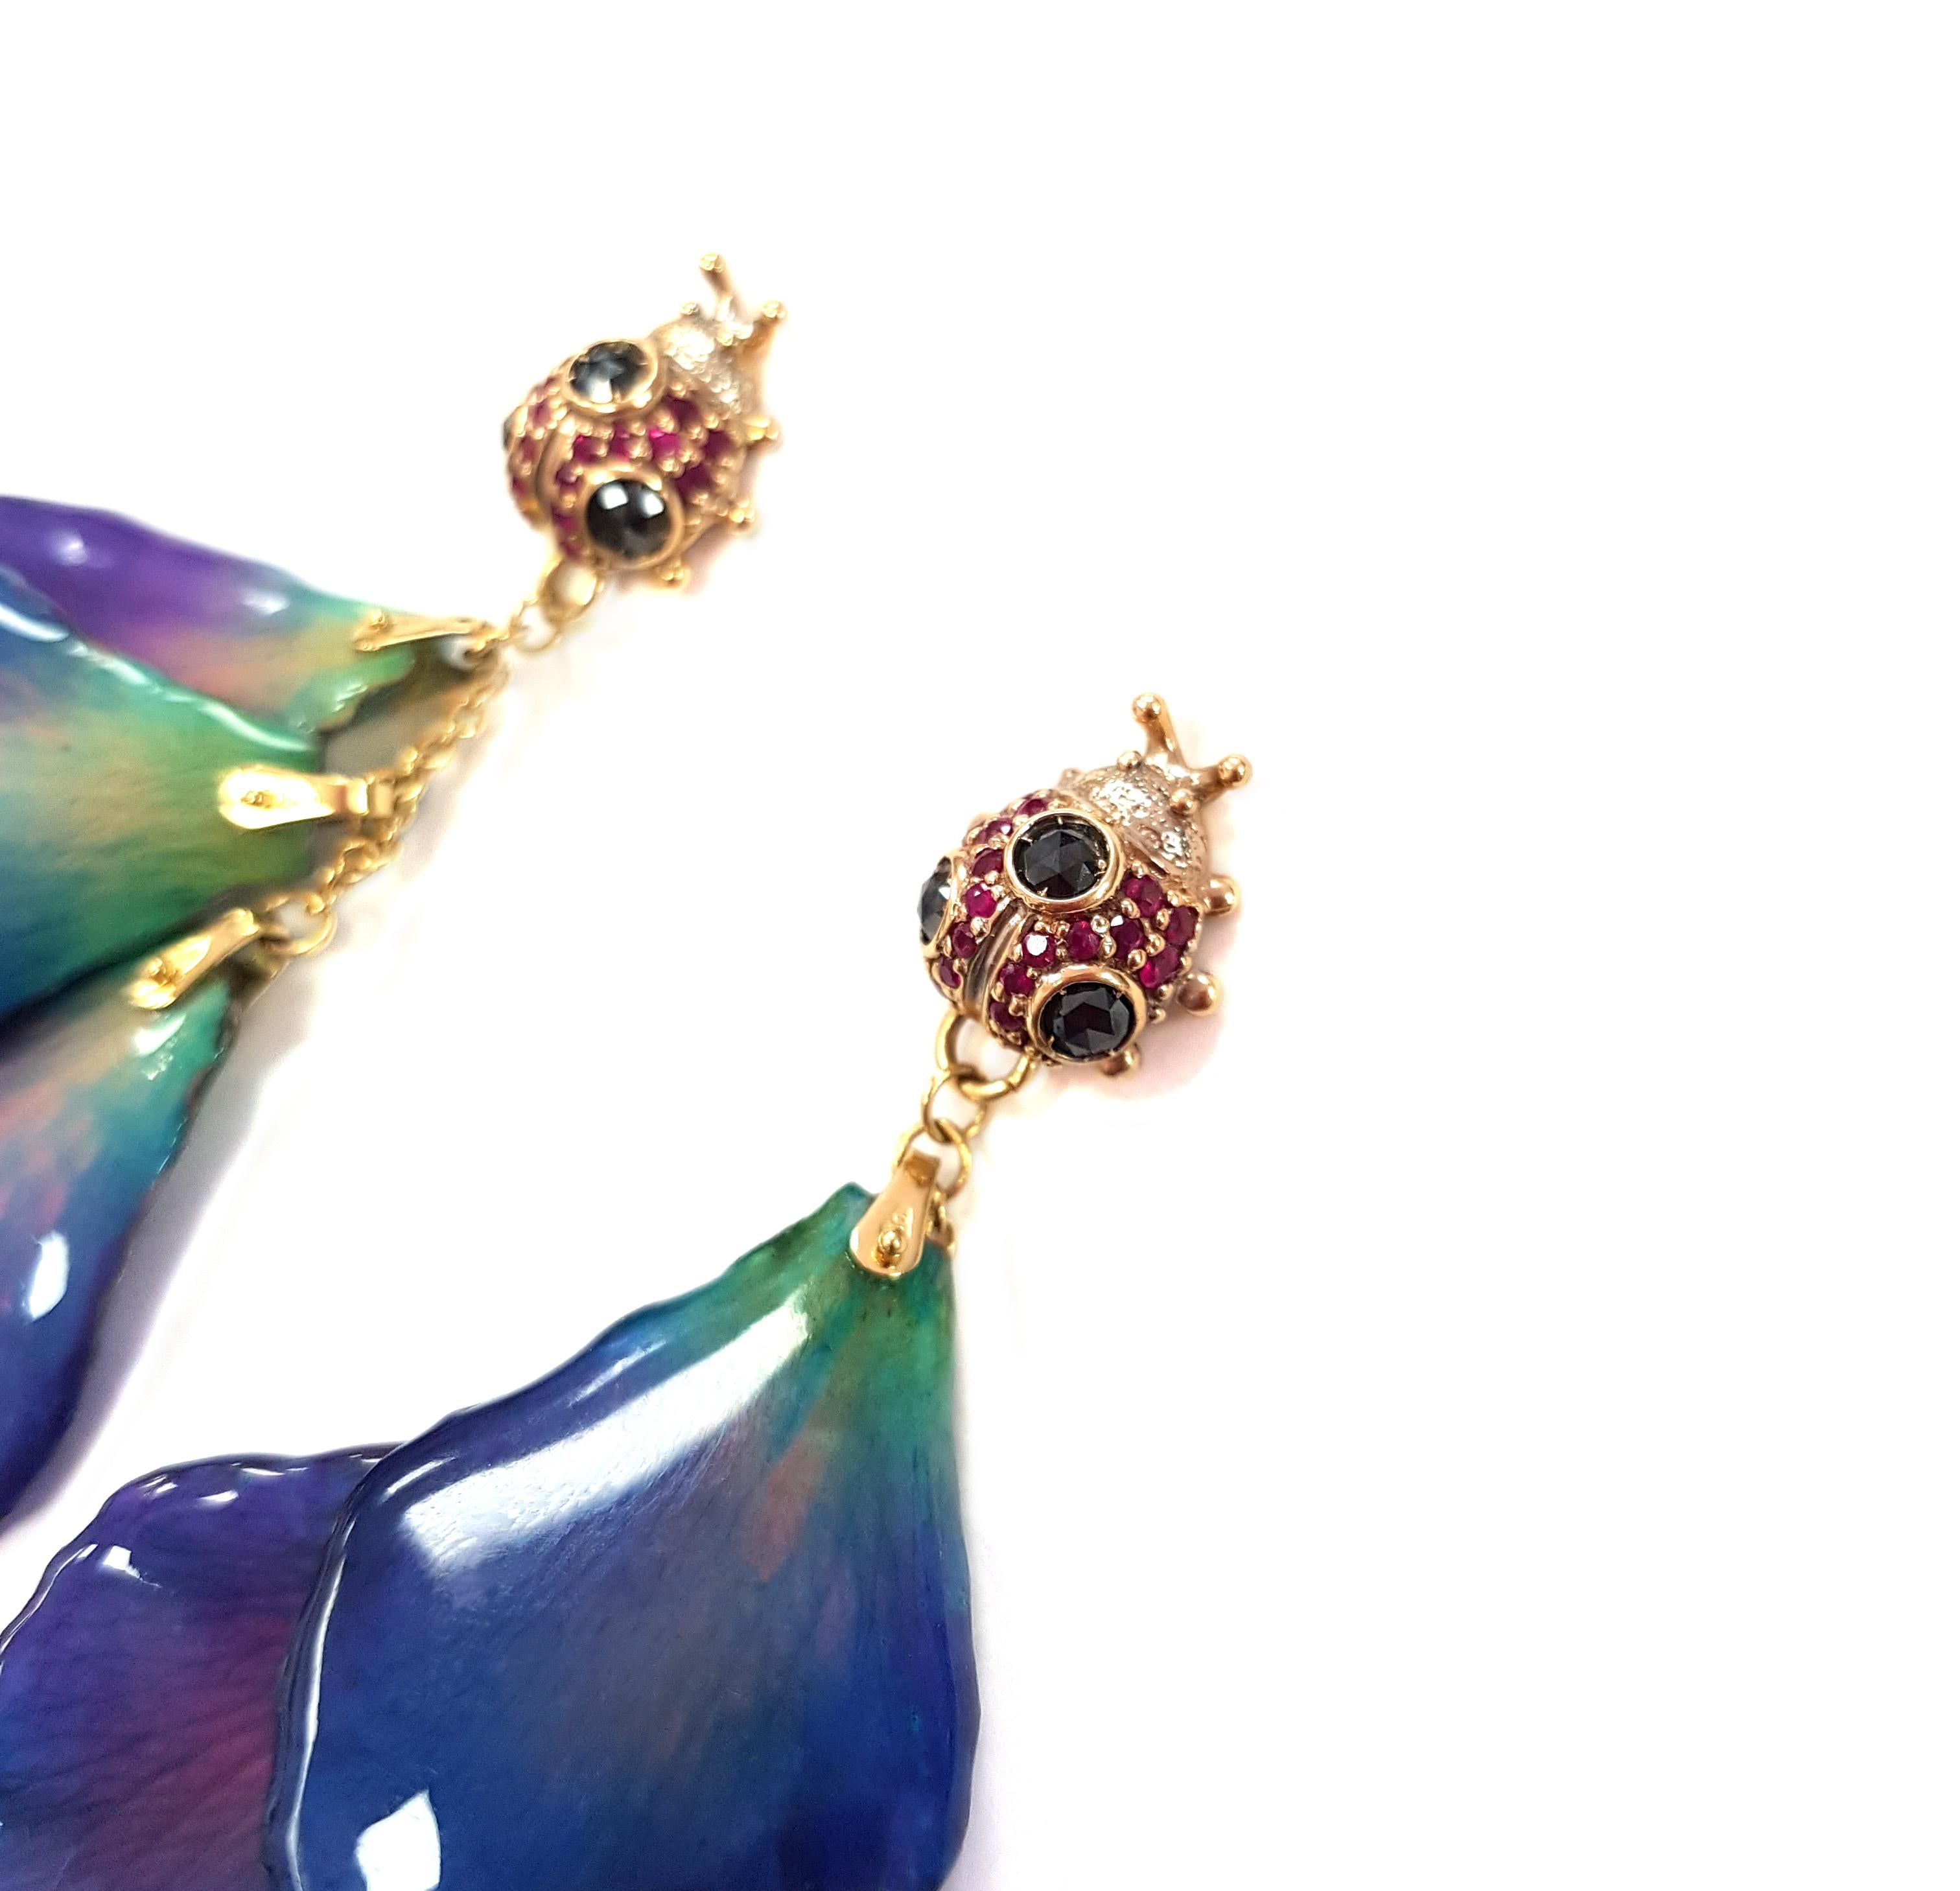 A vibrant pair of floral earrings masterfully created by hand. Each earring features three perfect petals from an actual orchid.  Each petal hangs from an 18-karat yellow gold chain which beautifully balances the cool tones of the mauve, blues and